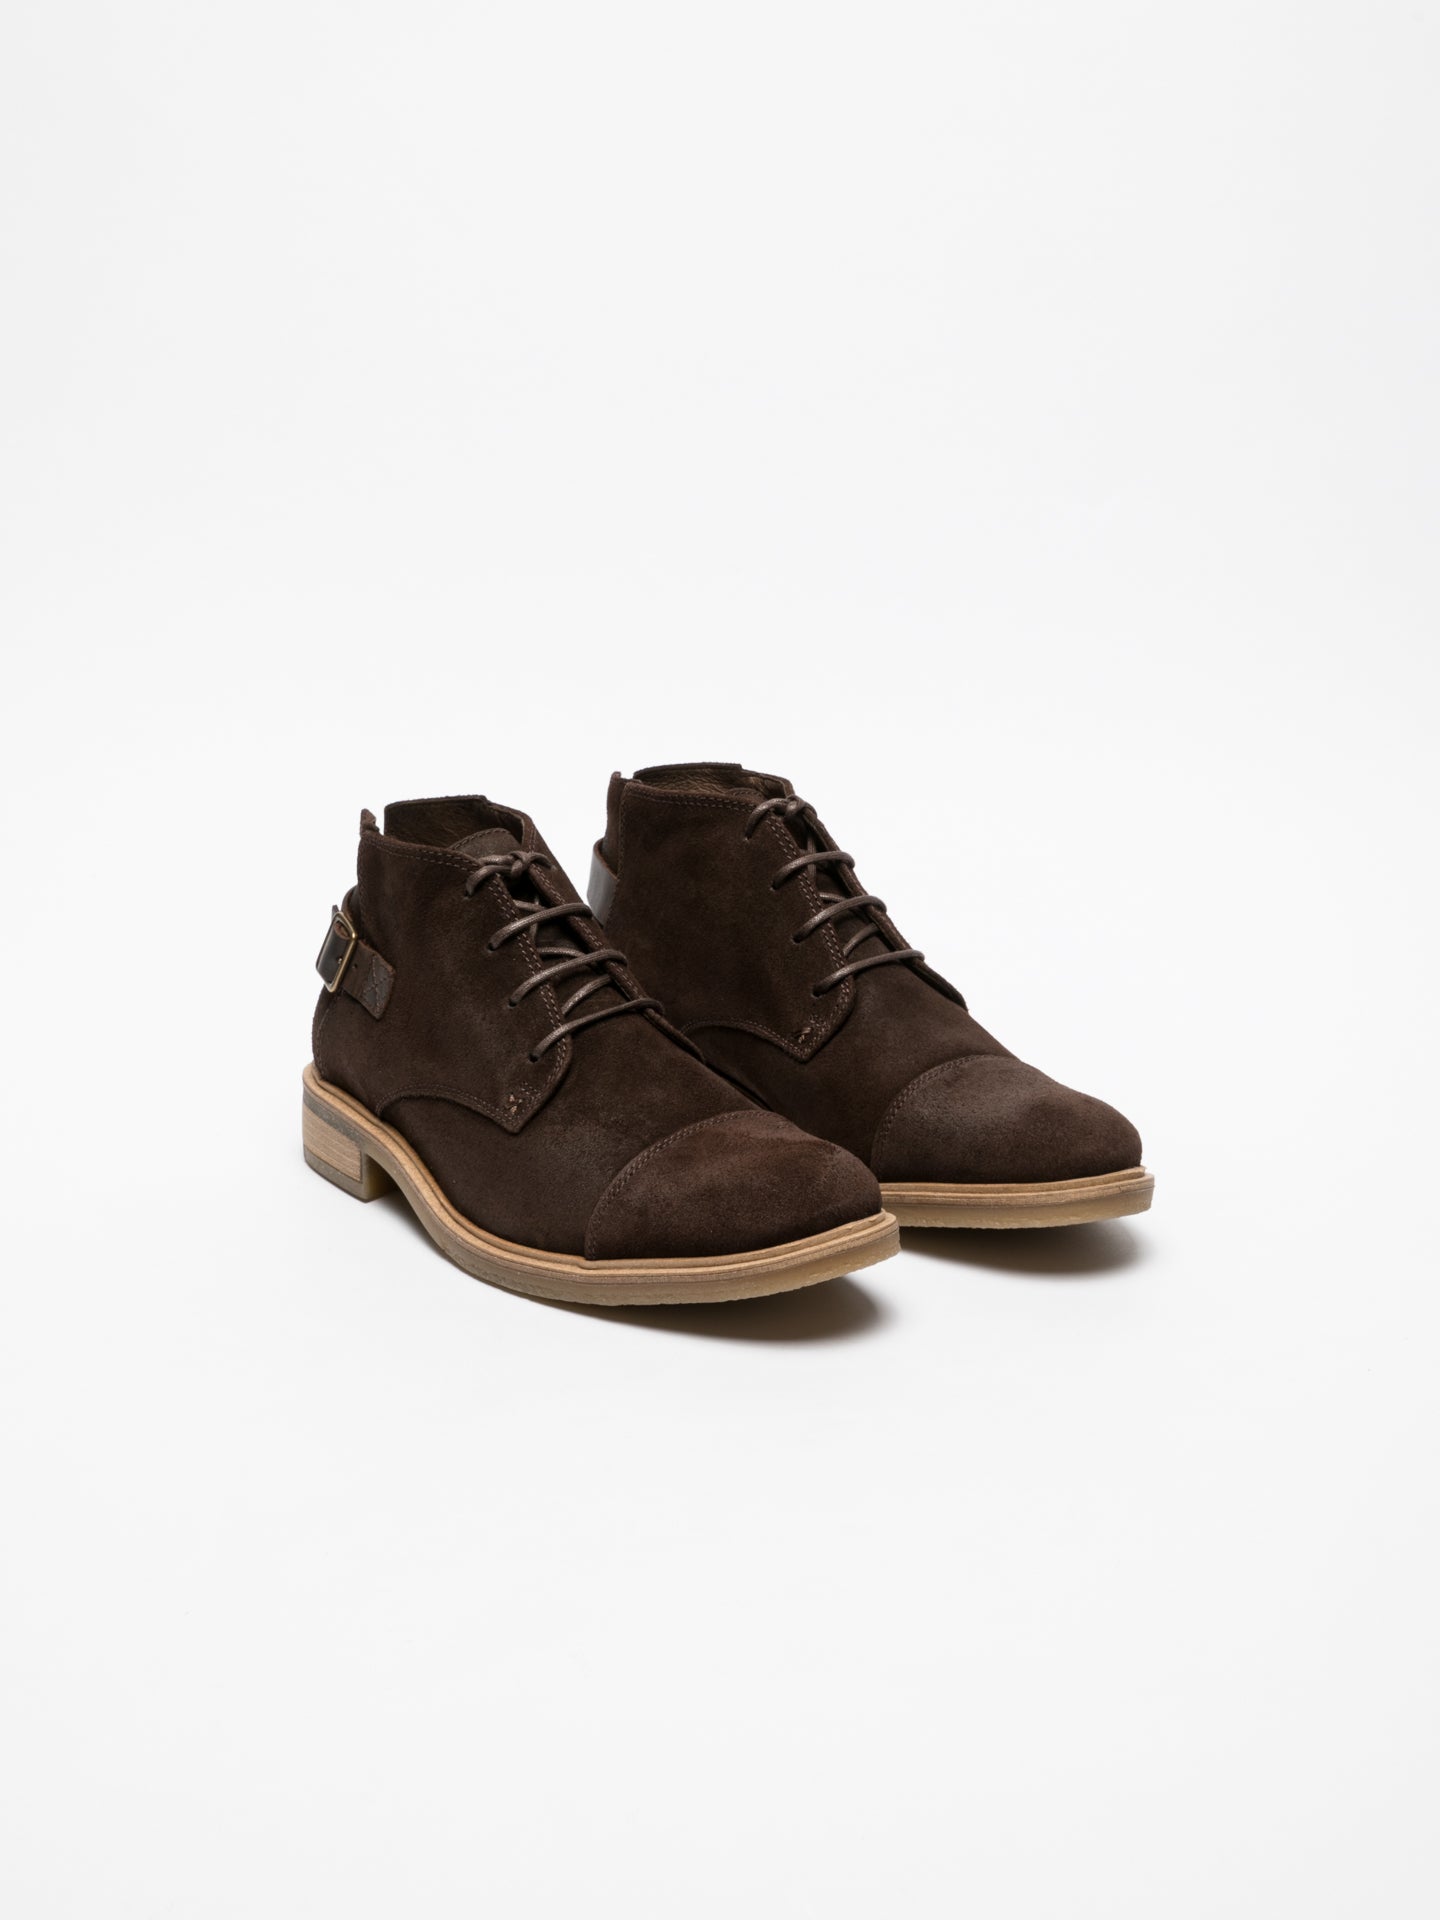 Fly London Brown Buckle Ankle Boots